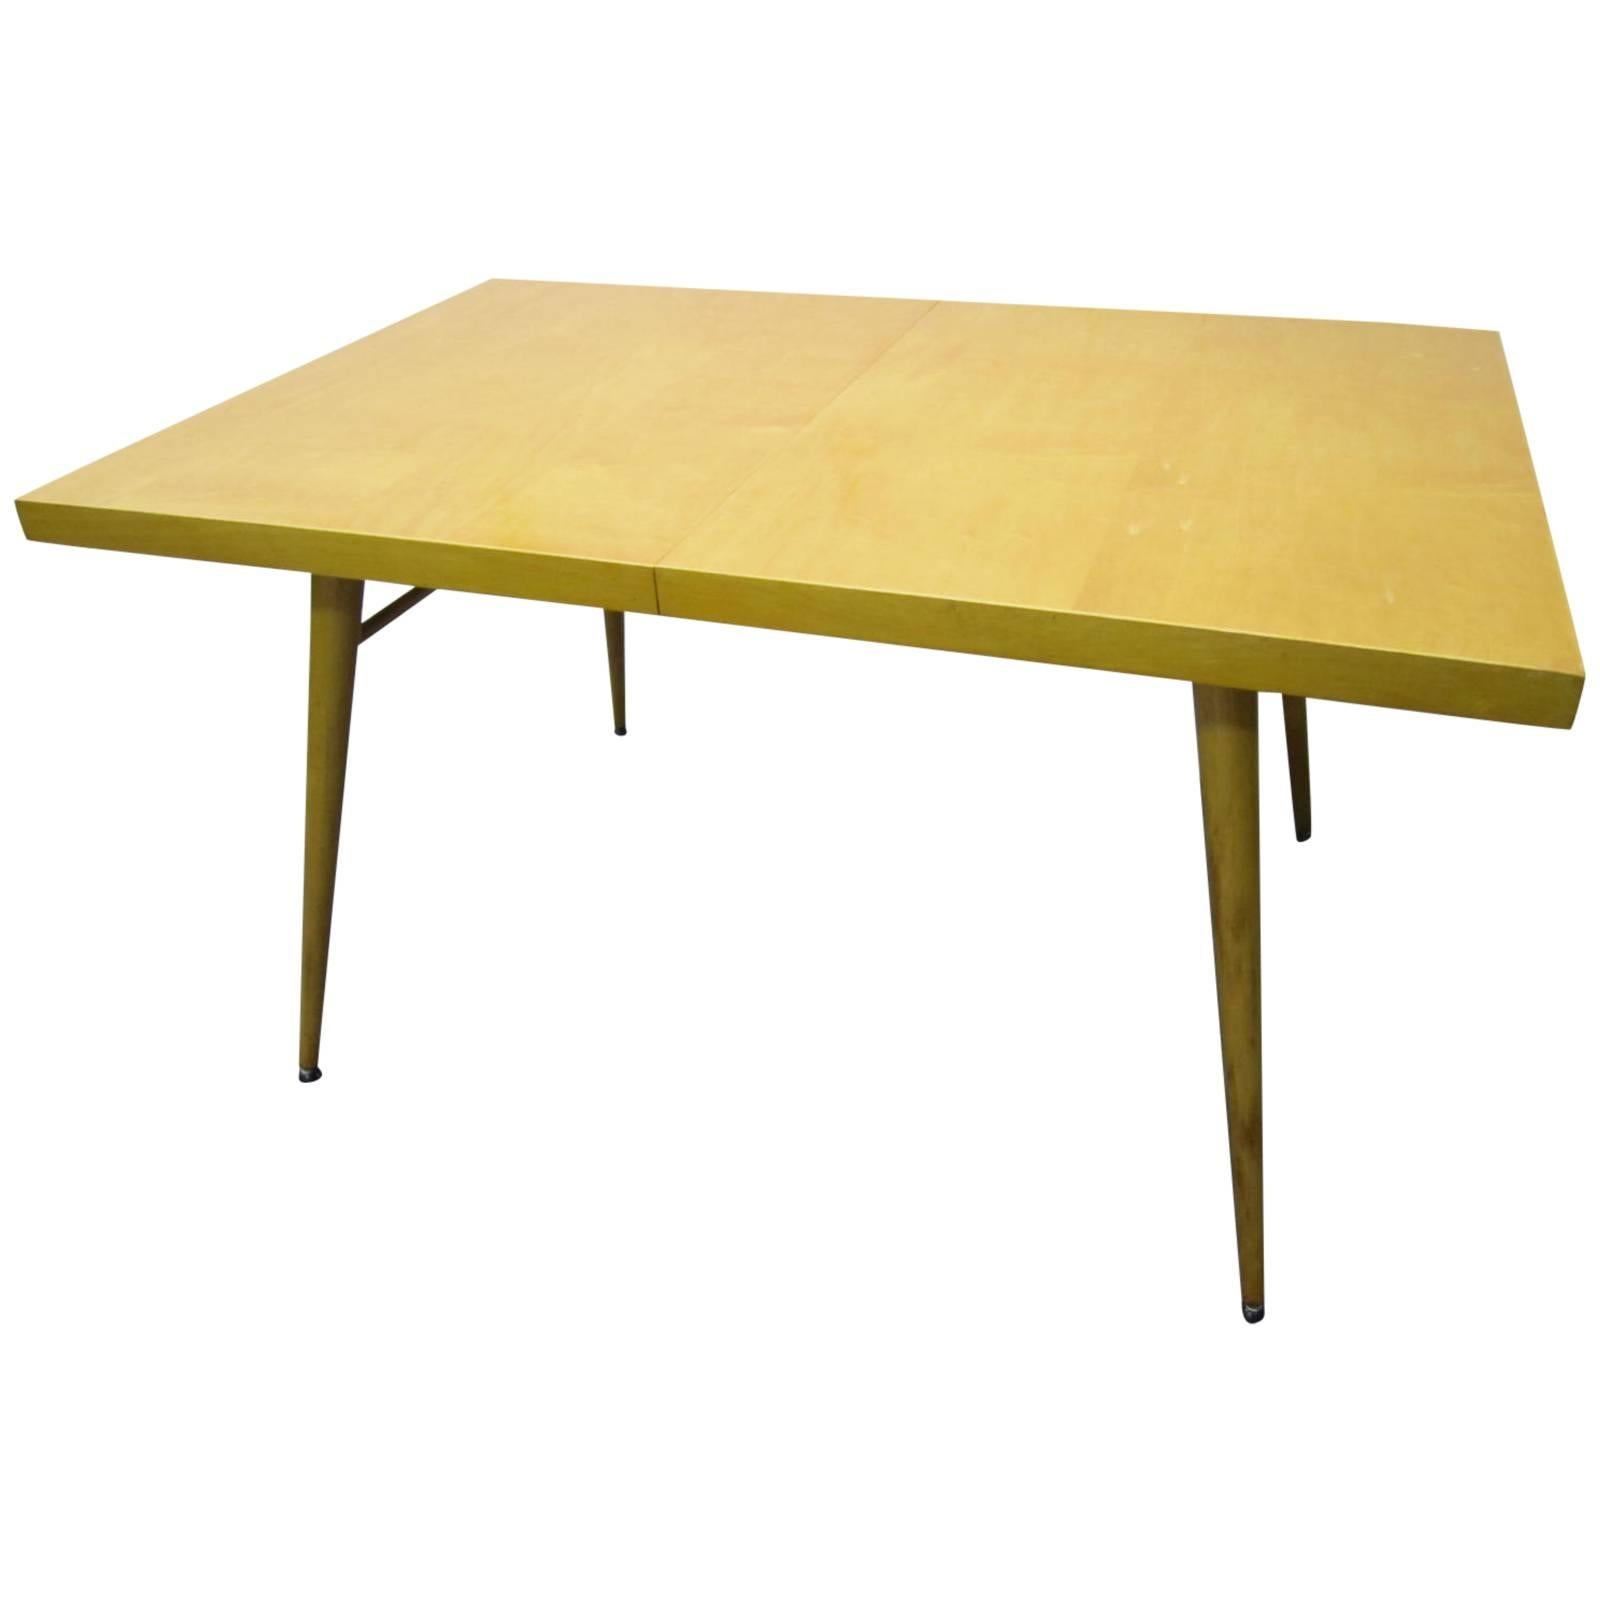 Signed Paul McCobb Maple Extension Dining Table, Two Leaves, Mid-Century Modern For Sale